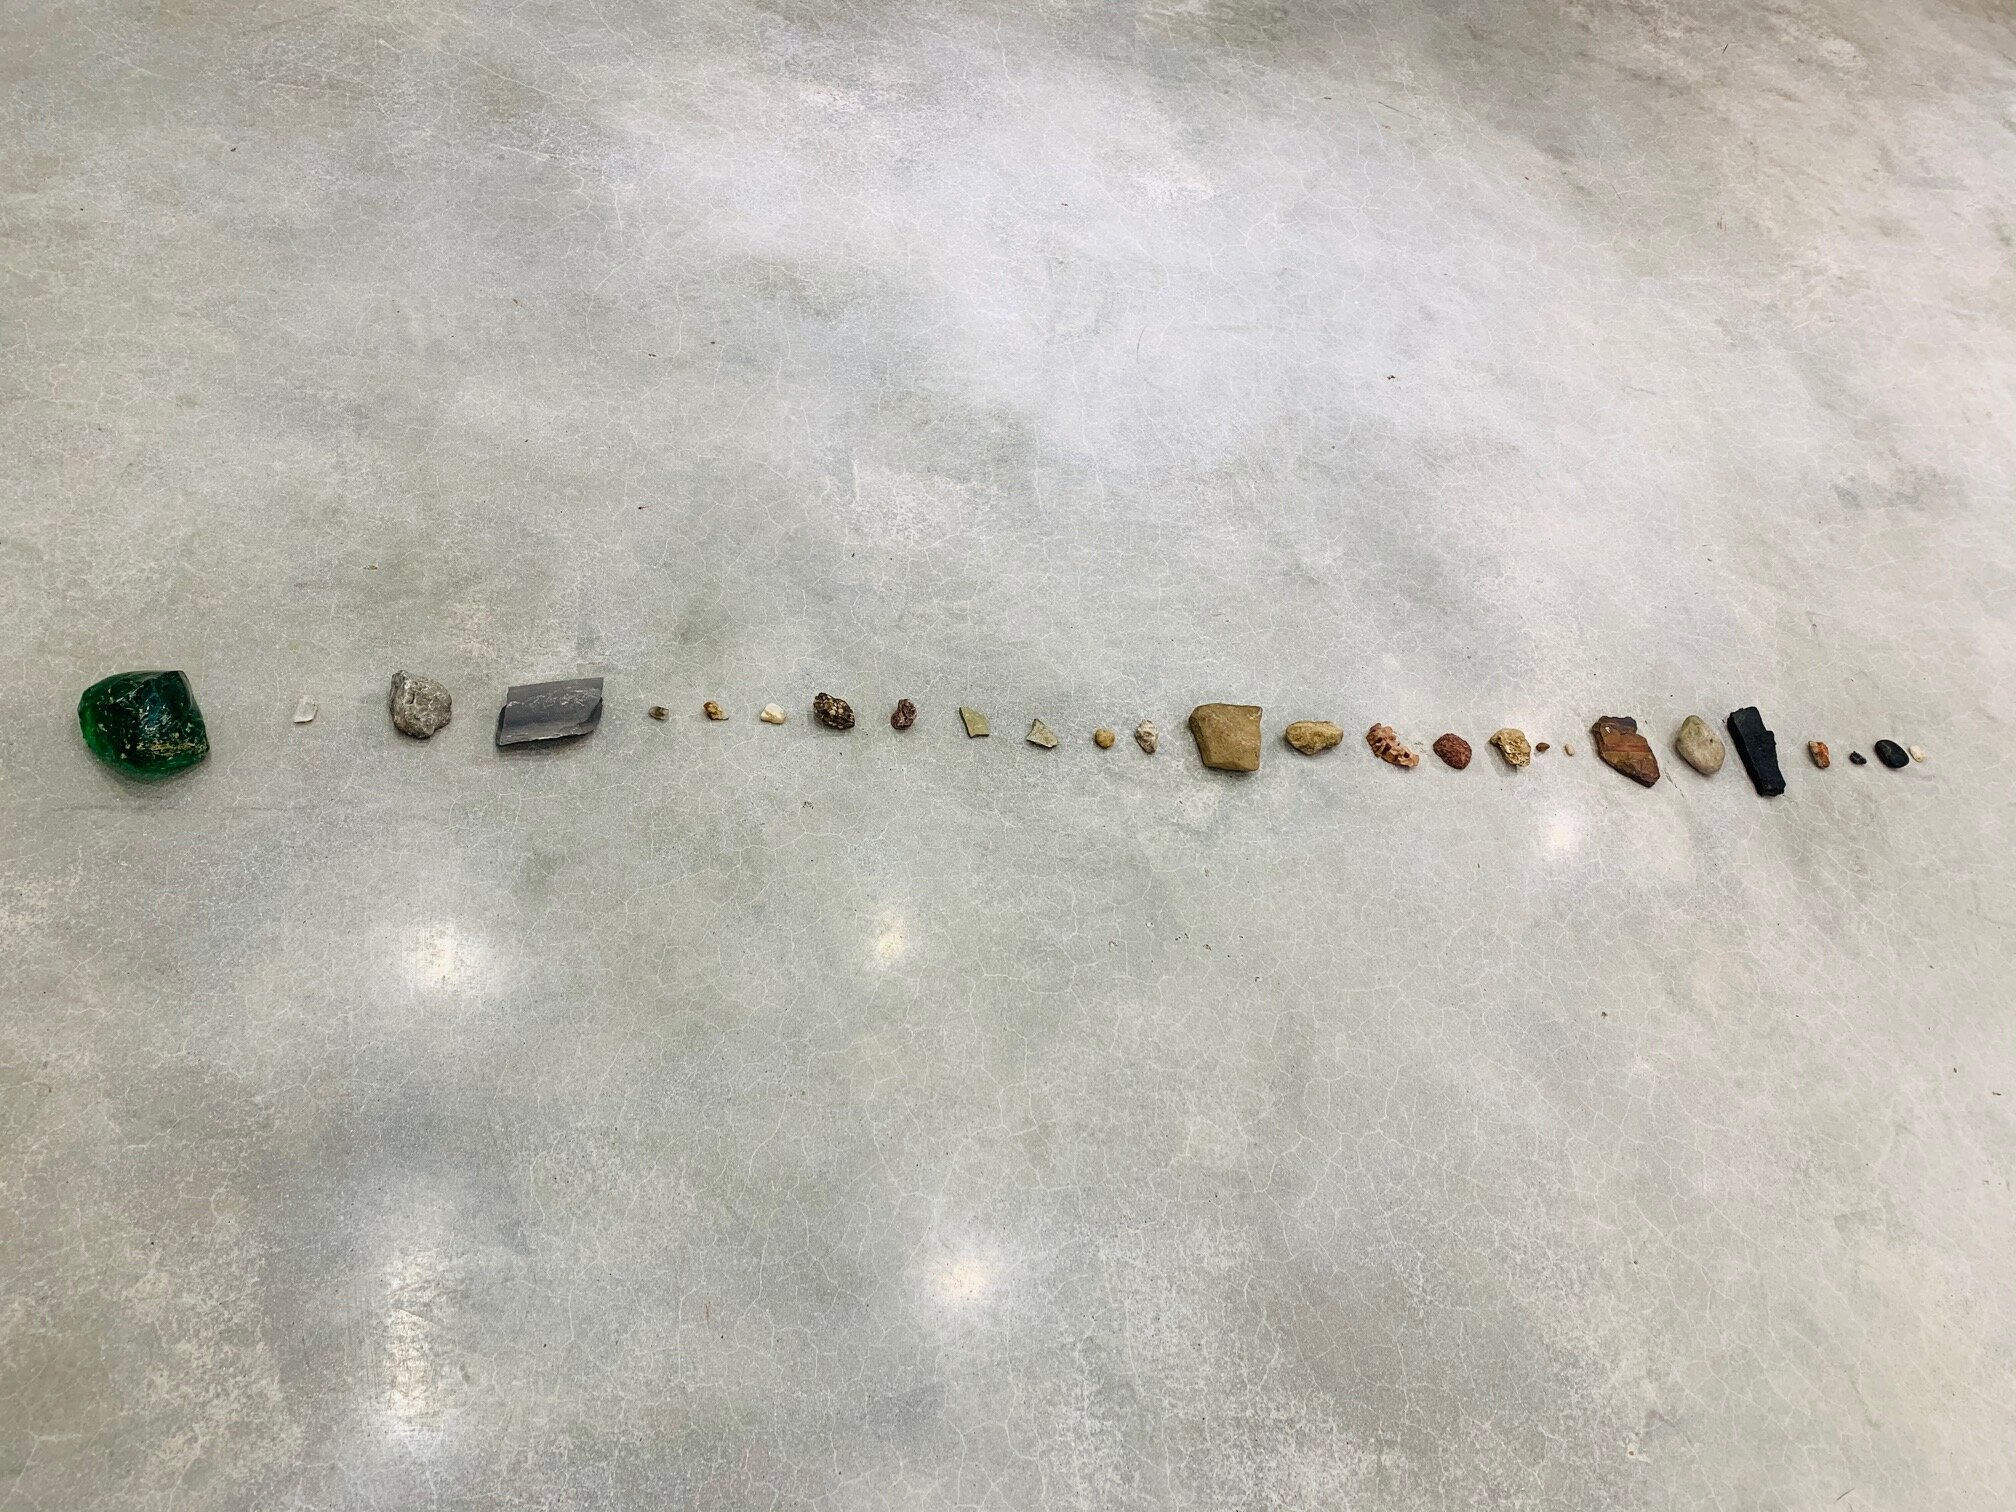  Dylan Pew (American, b. 1995)  rock collection,  2021 Gifted rocks dimensions variable Courtesy the artist 